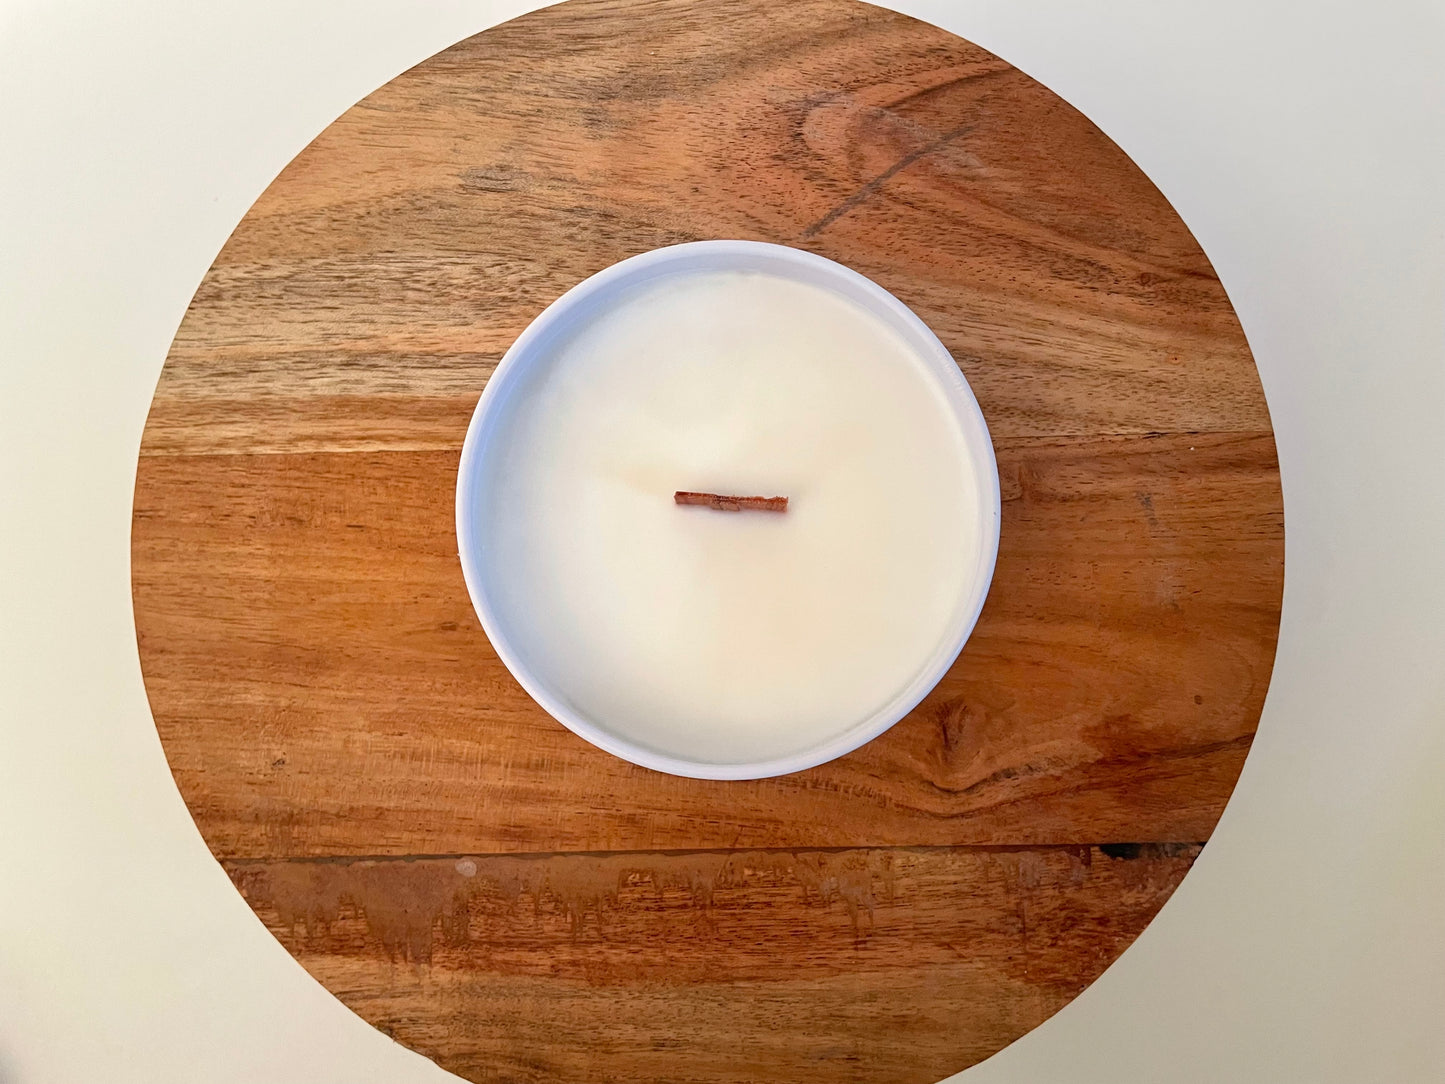 Lavender Soy Wax Wood Wick Candle